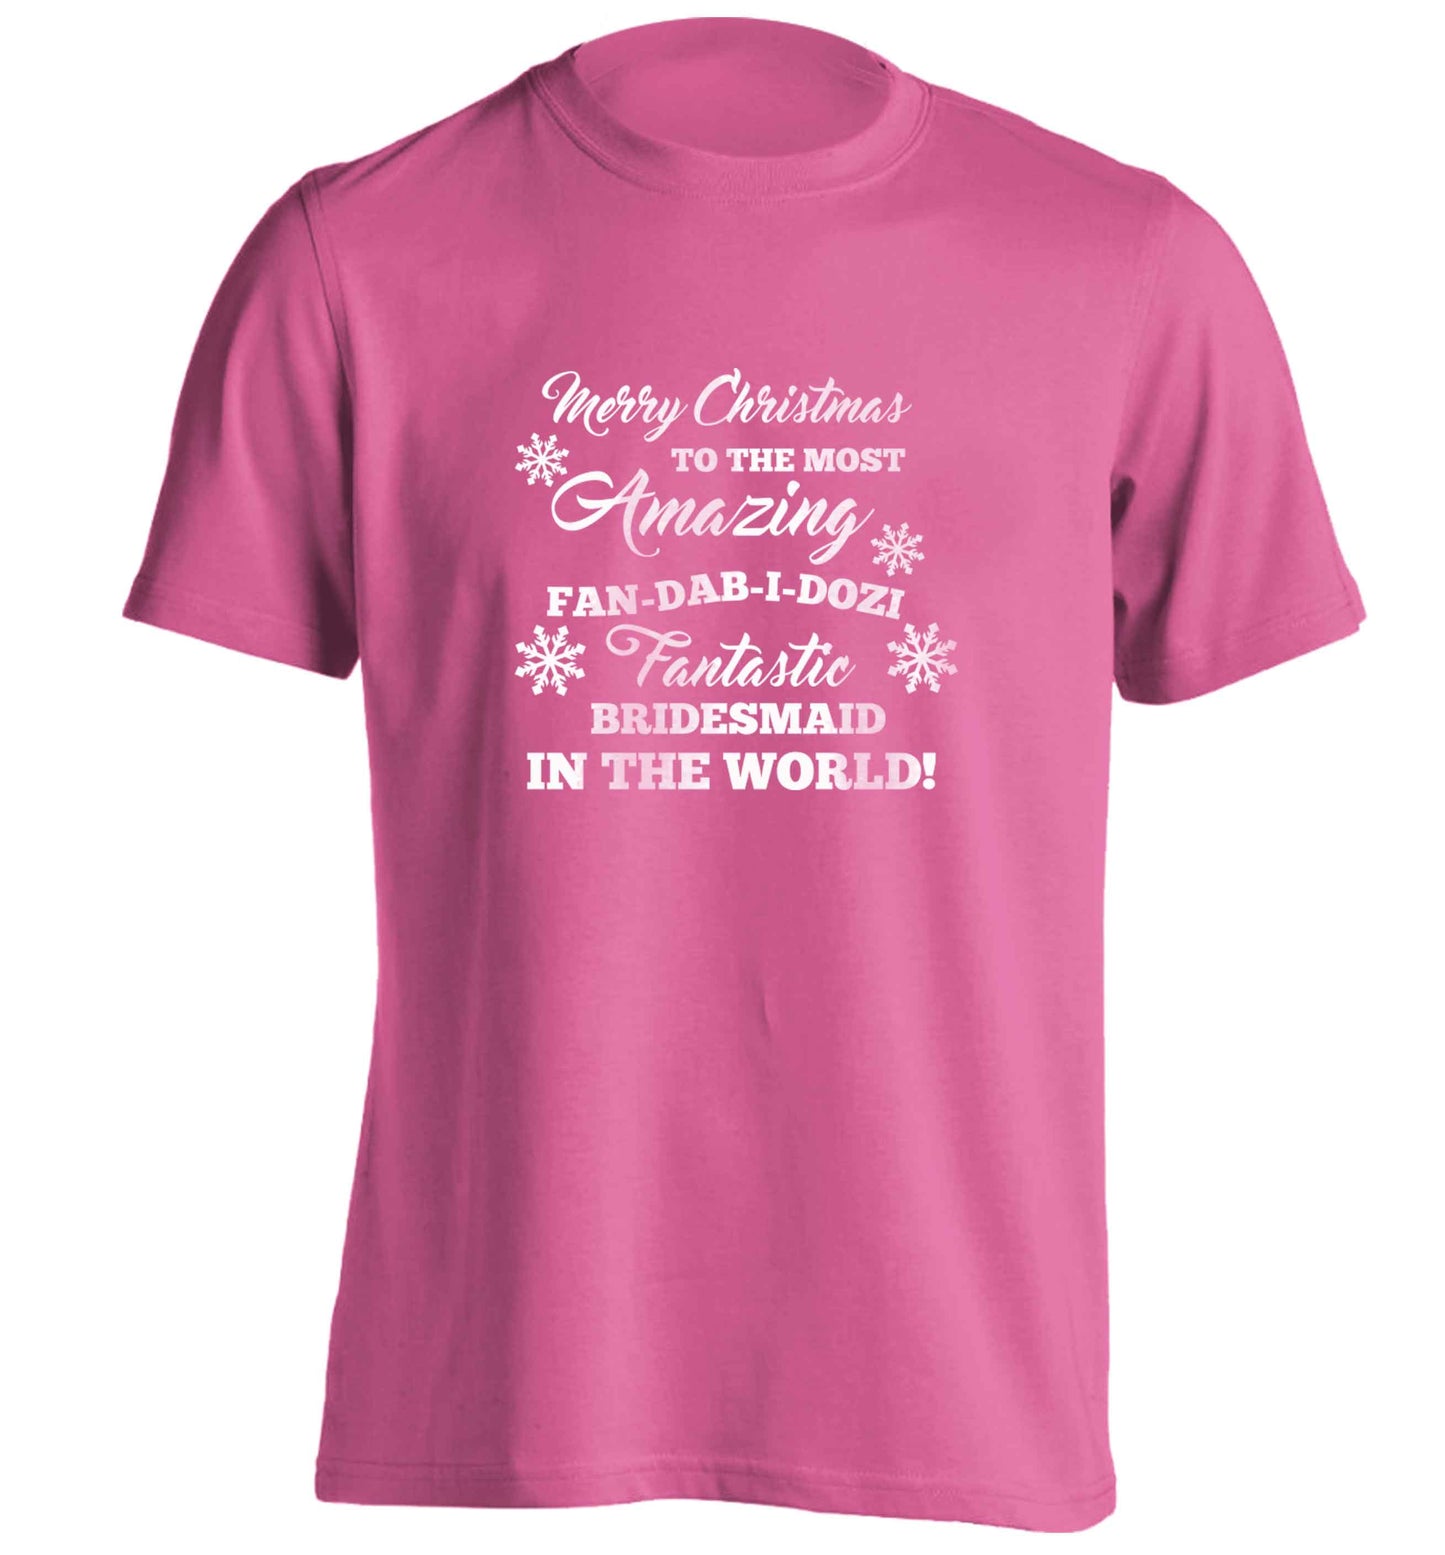 Merry Christmas to the most amazing fan-dab-i-dozi fantasic bridesmaid in the world adults unisex pink Tshirt 2XL